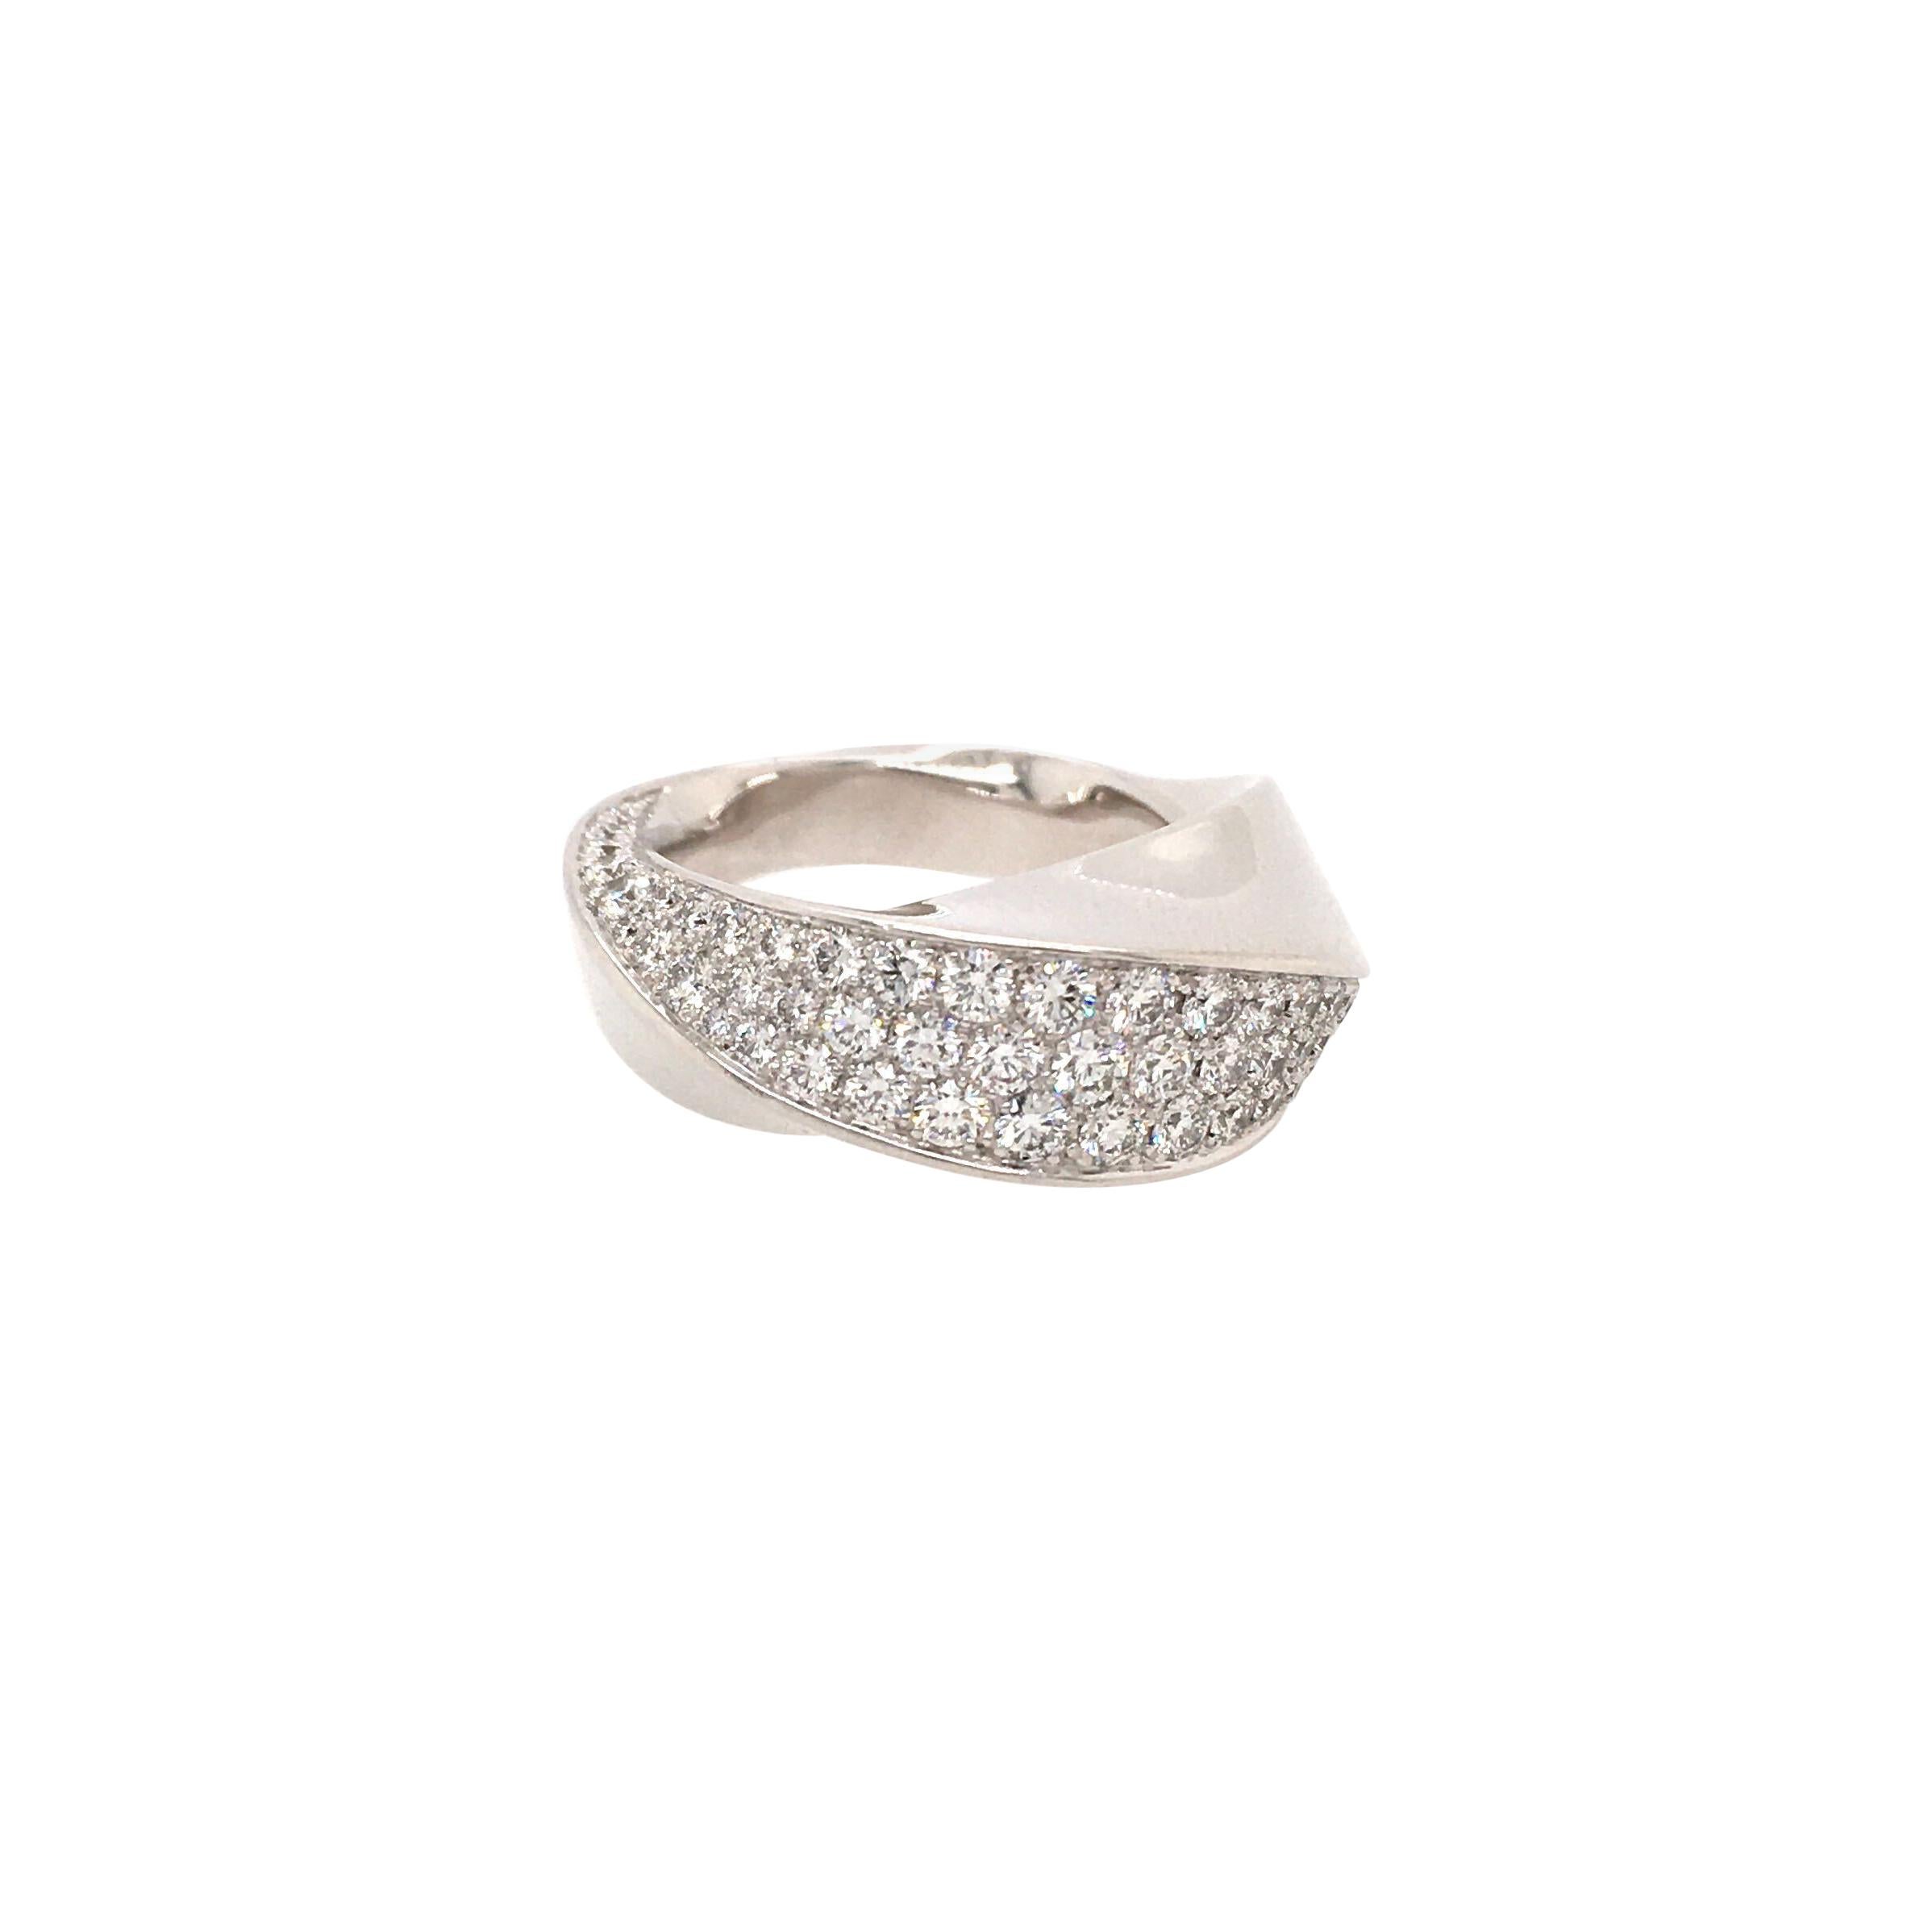 Cartier White Gold and Diamond Ring